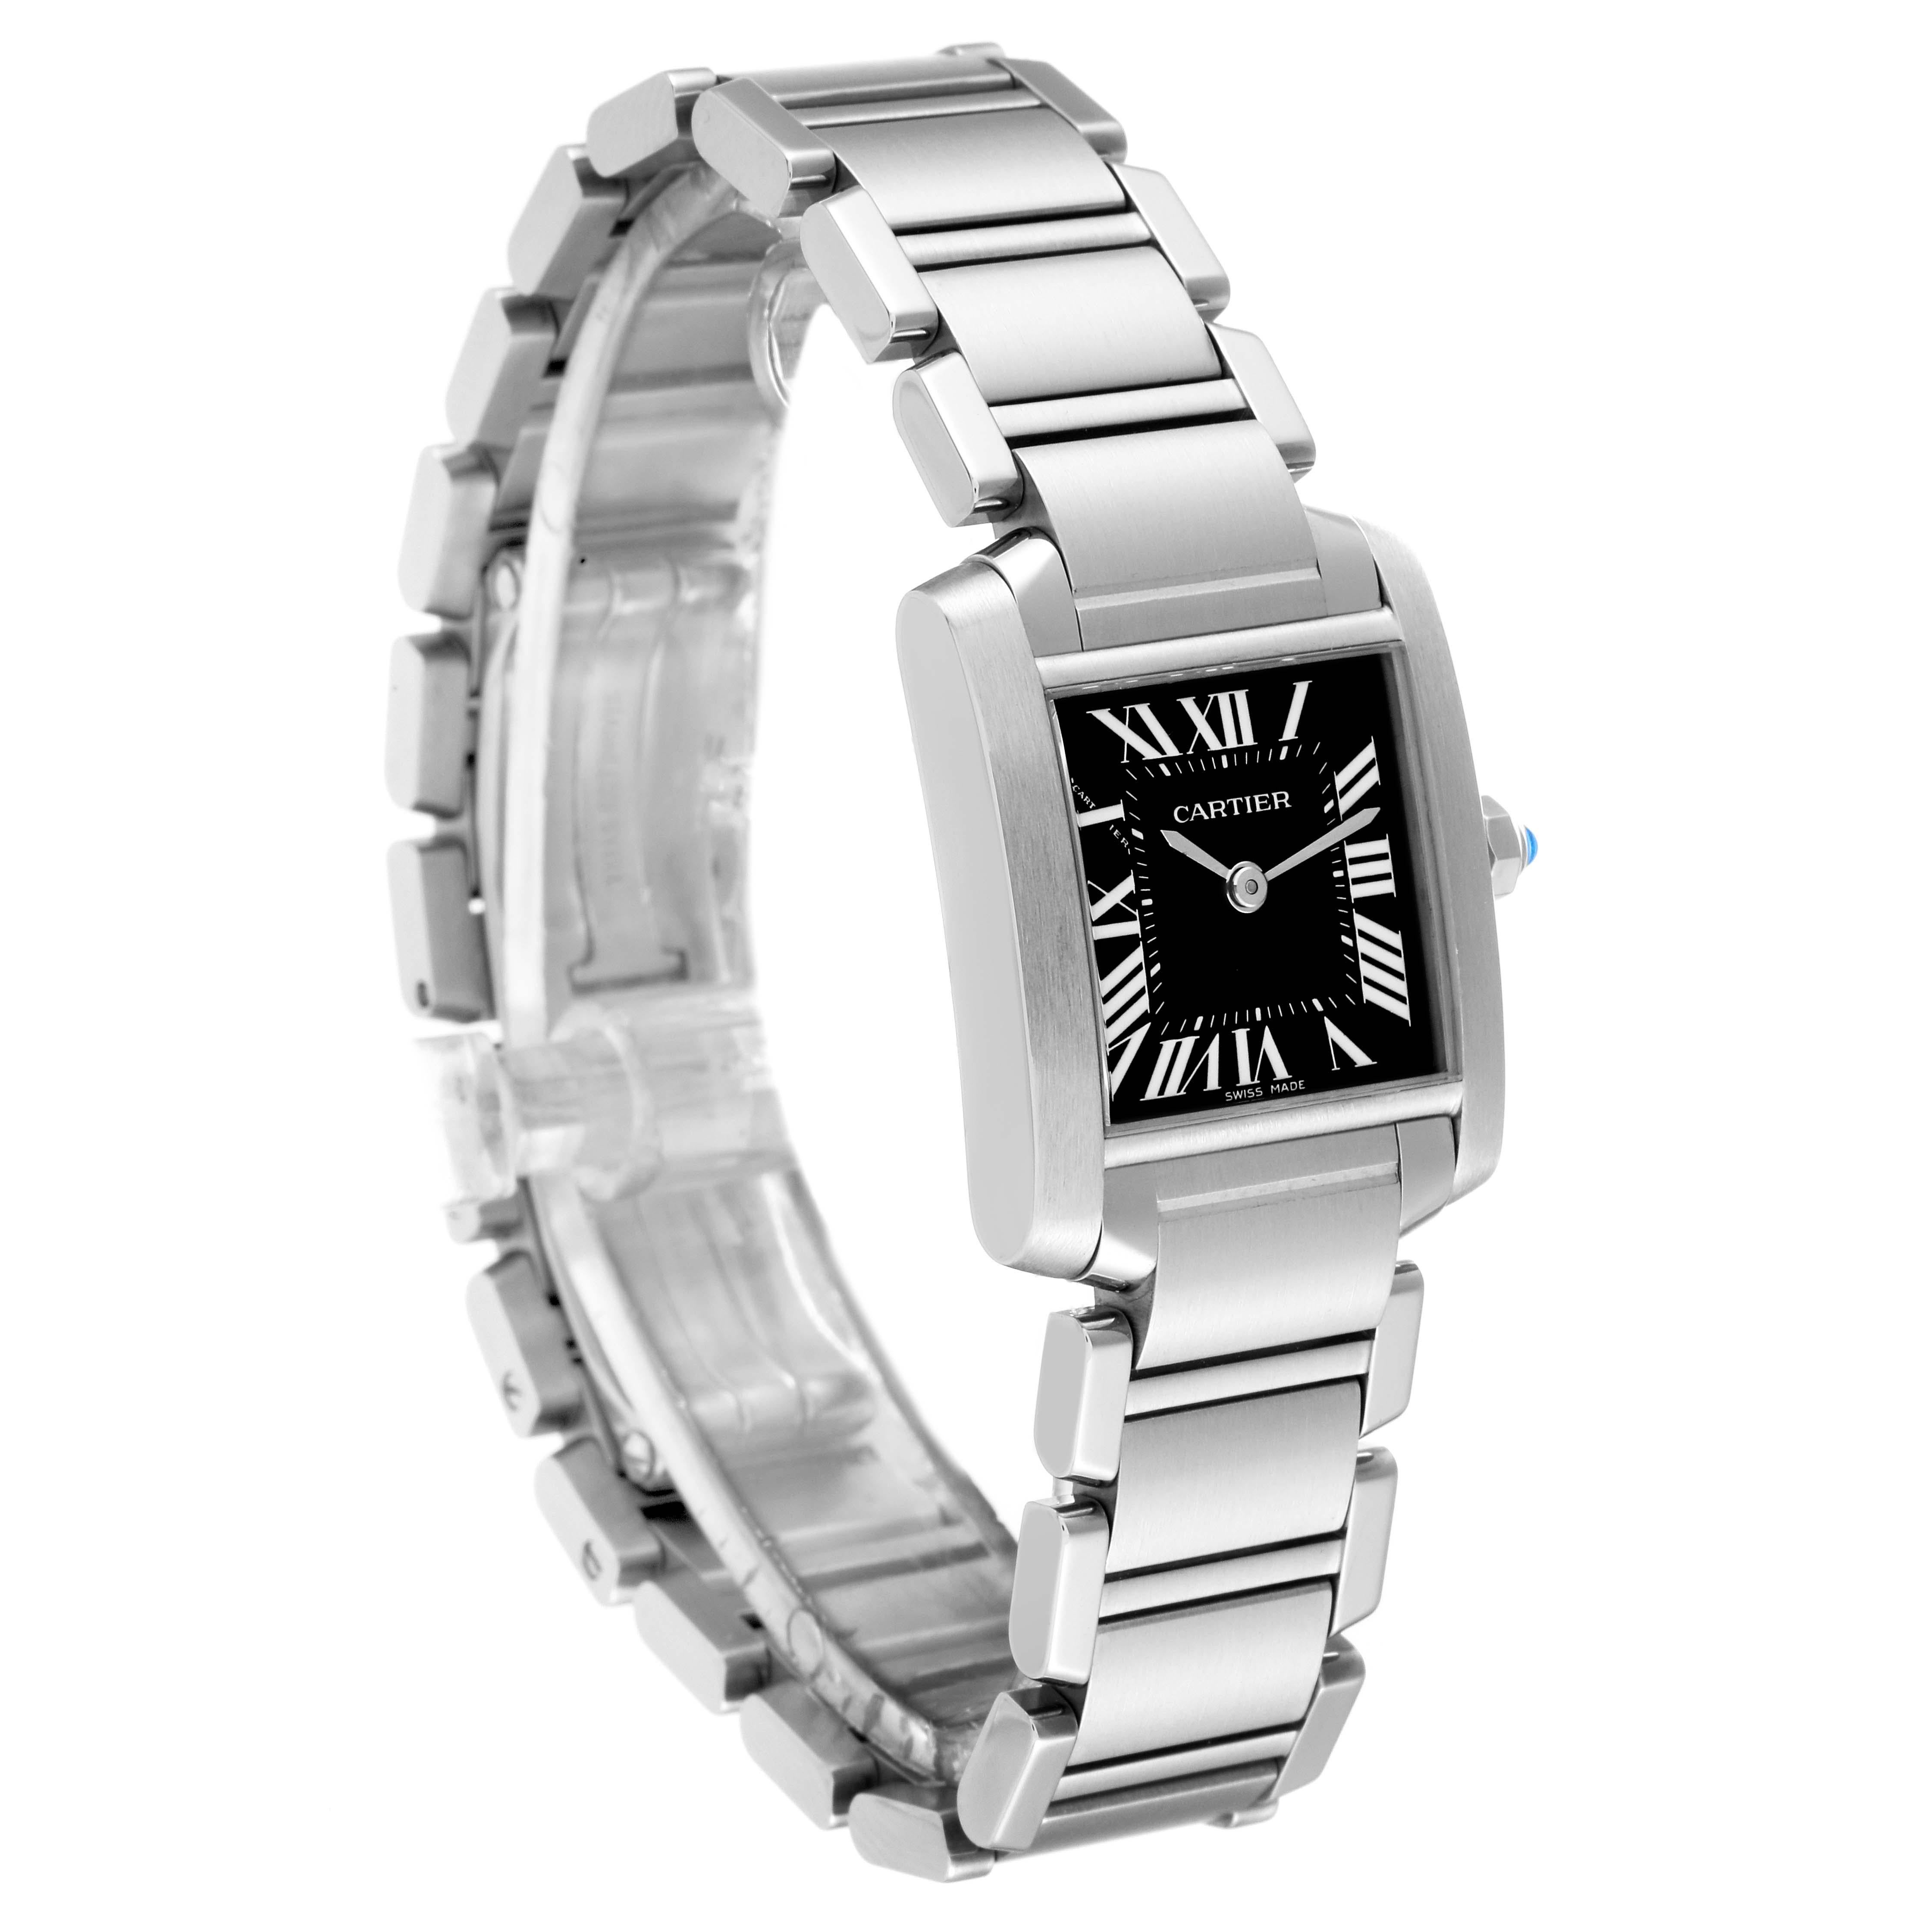 Cartier Tank Francaise Black Dial Steel Ladies Watch W51026Q3 In Excellent Condition For Sale In Atlanta, GA